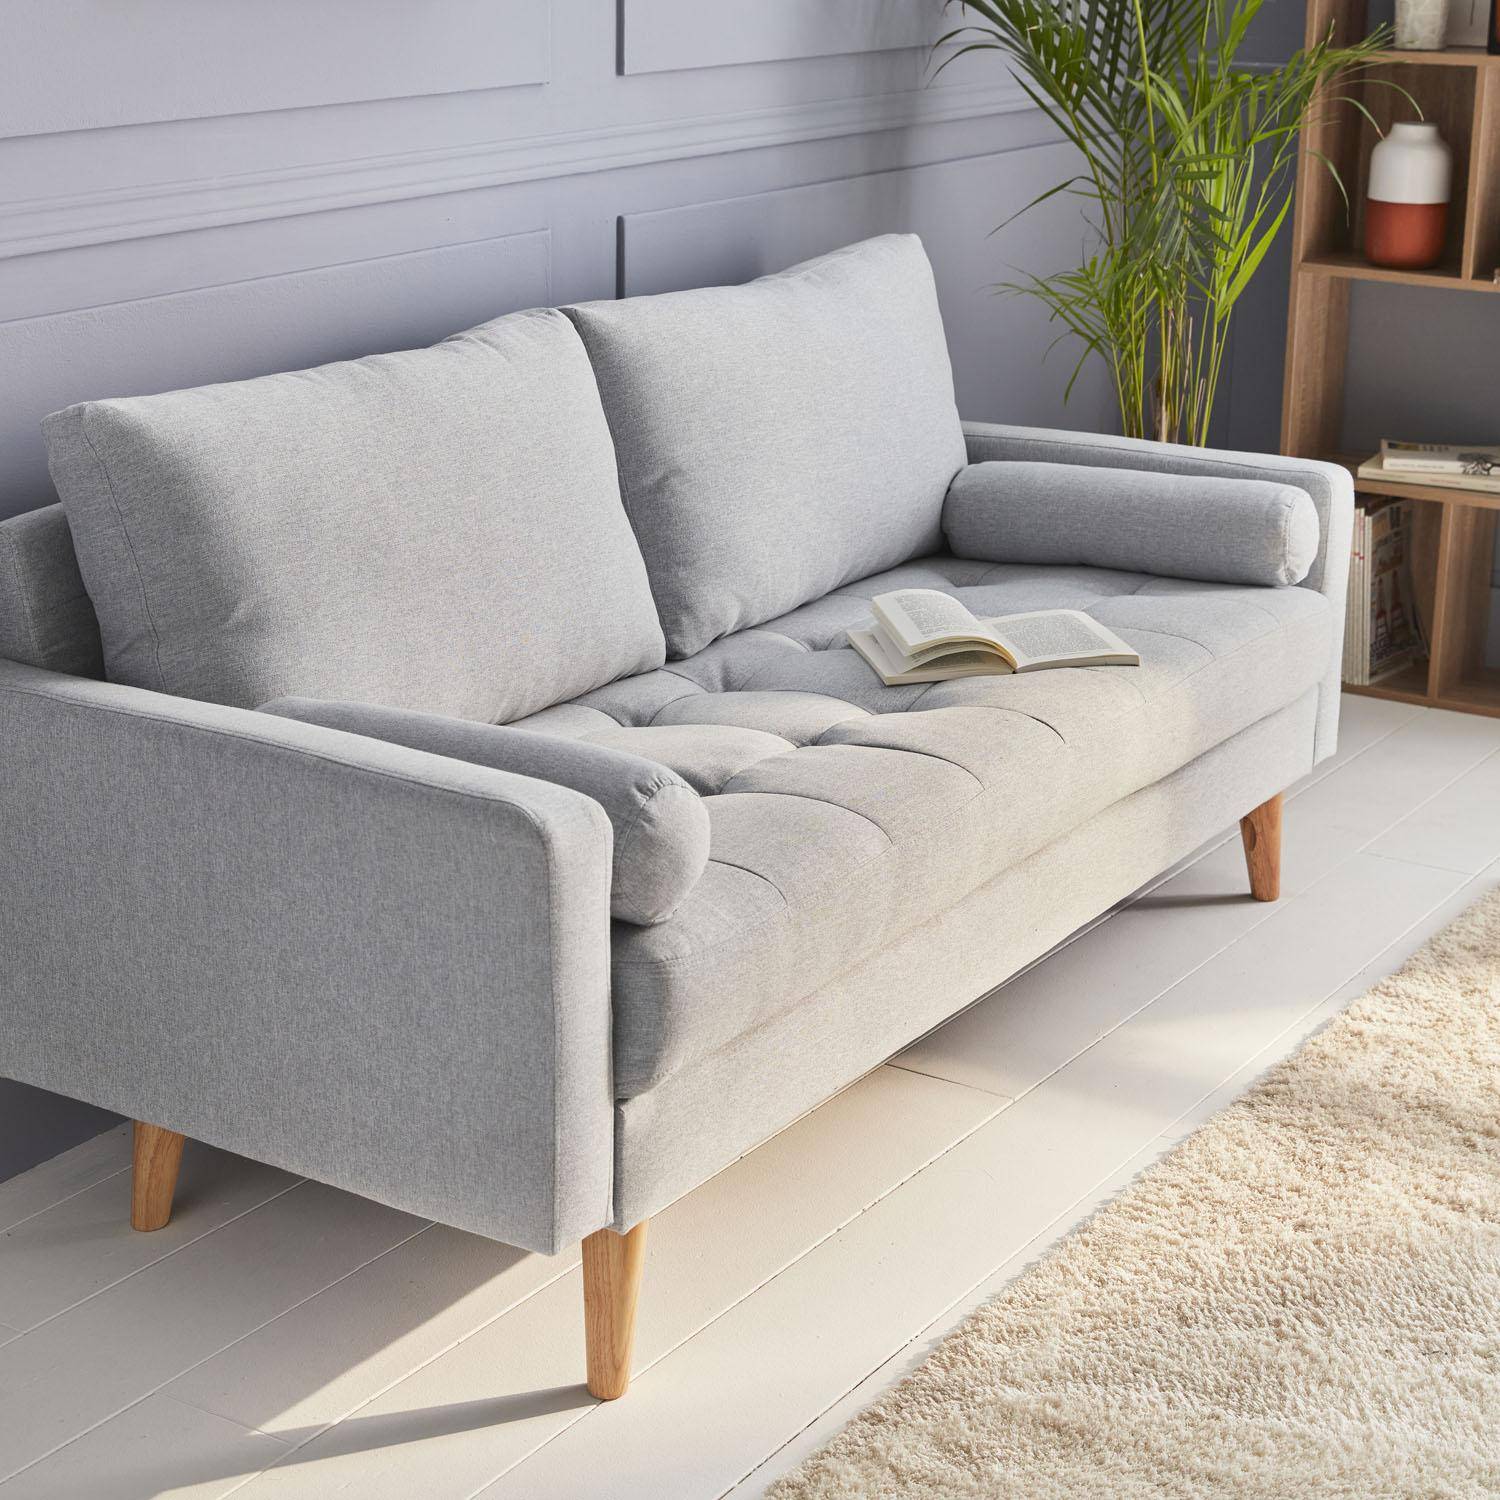 3-seater sofa with Scandi style wooden legs - Ivar - Grey Photo2